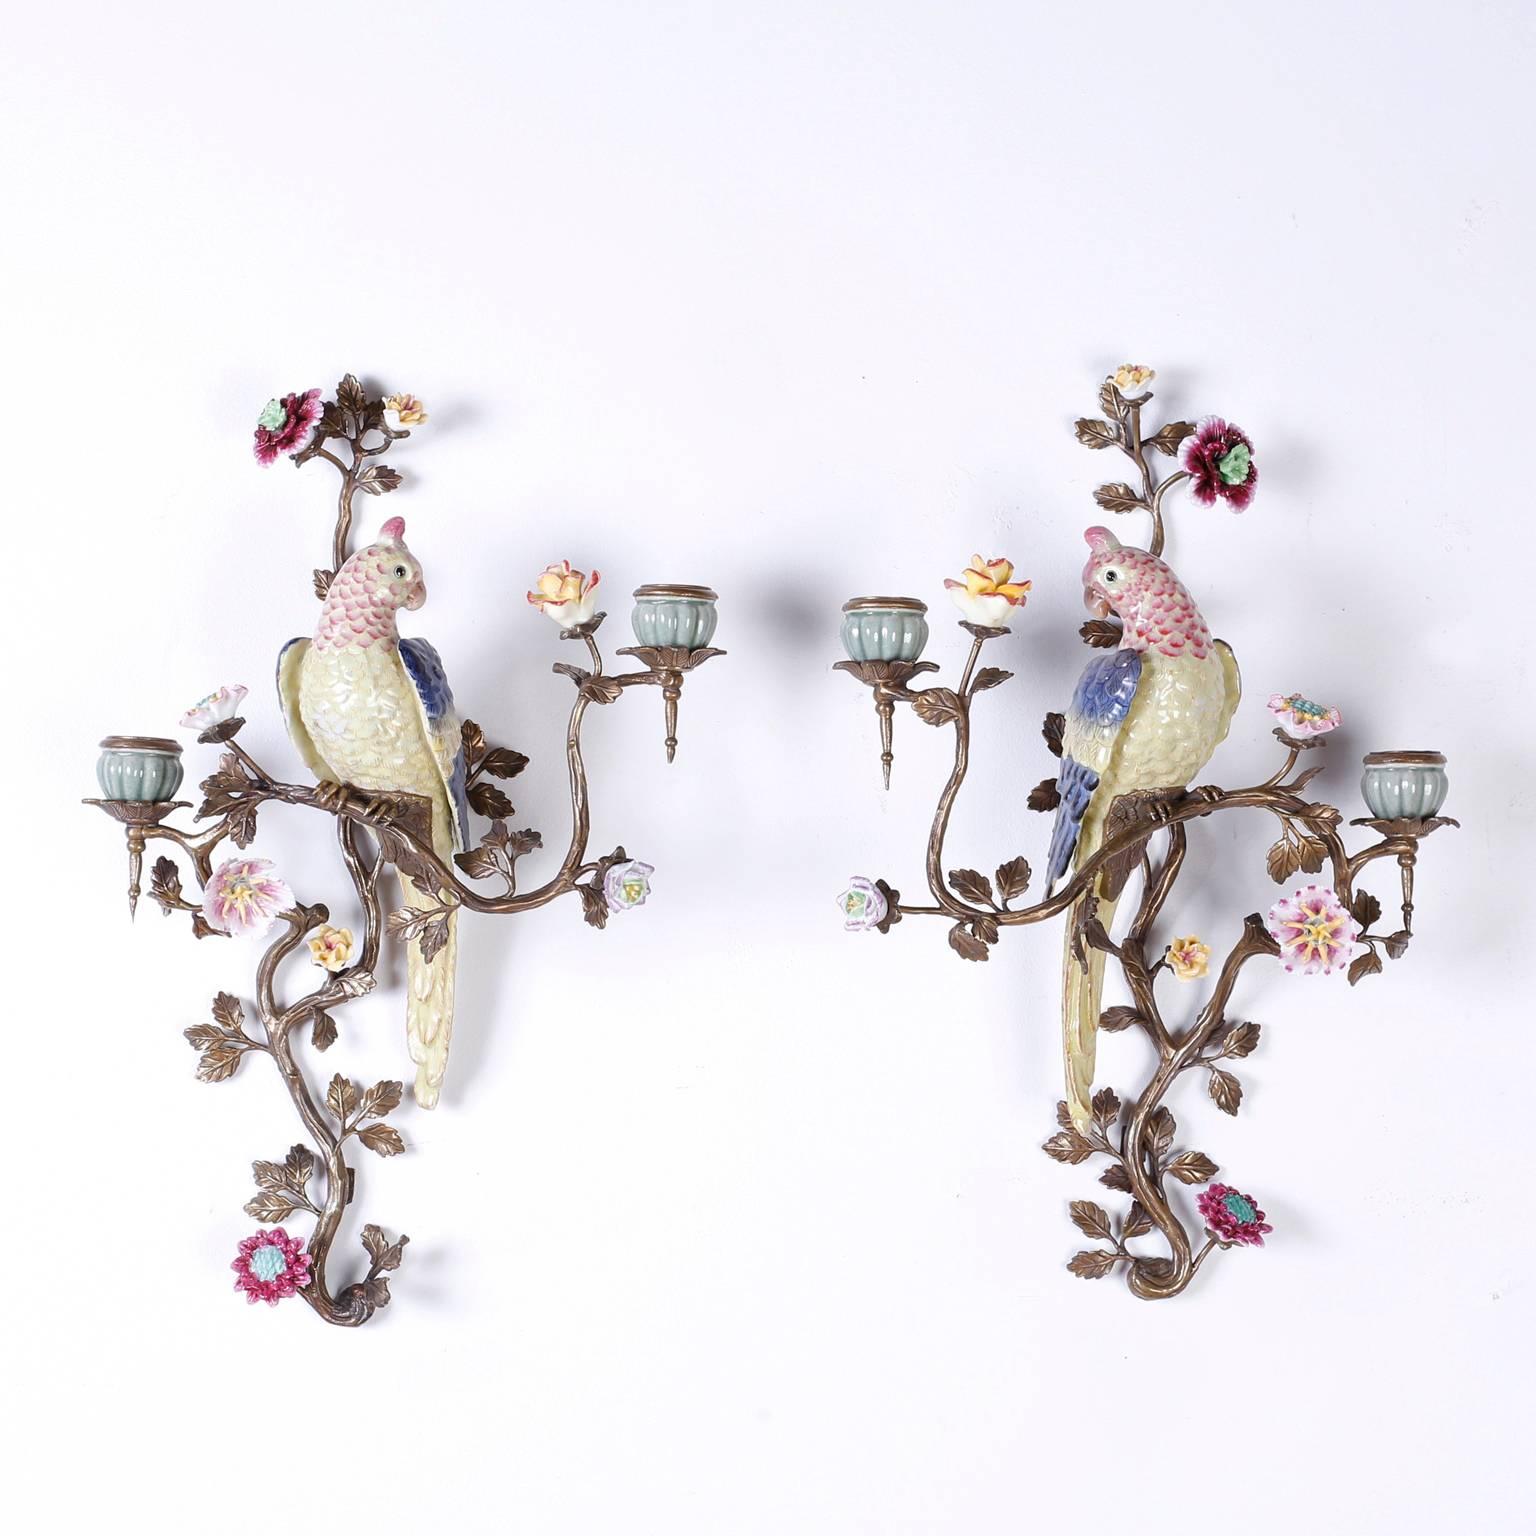 Fanciful pair of vintage sconces with porcelain birds or parrots and featuring delicate porcelain flowers set on brass stems with leaves having two candleholders on each sconce.